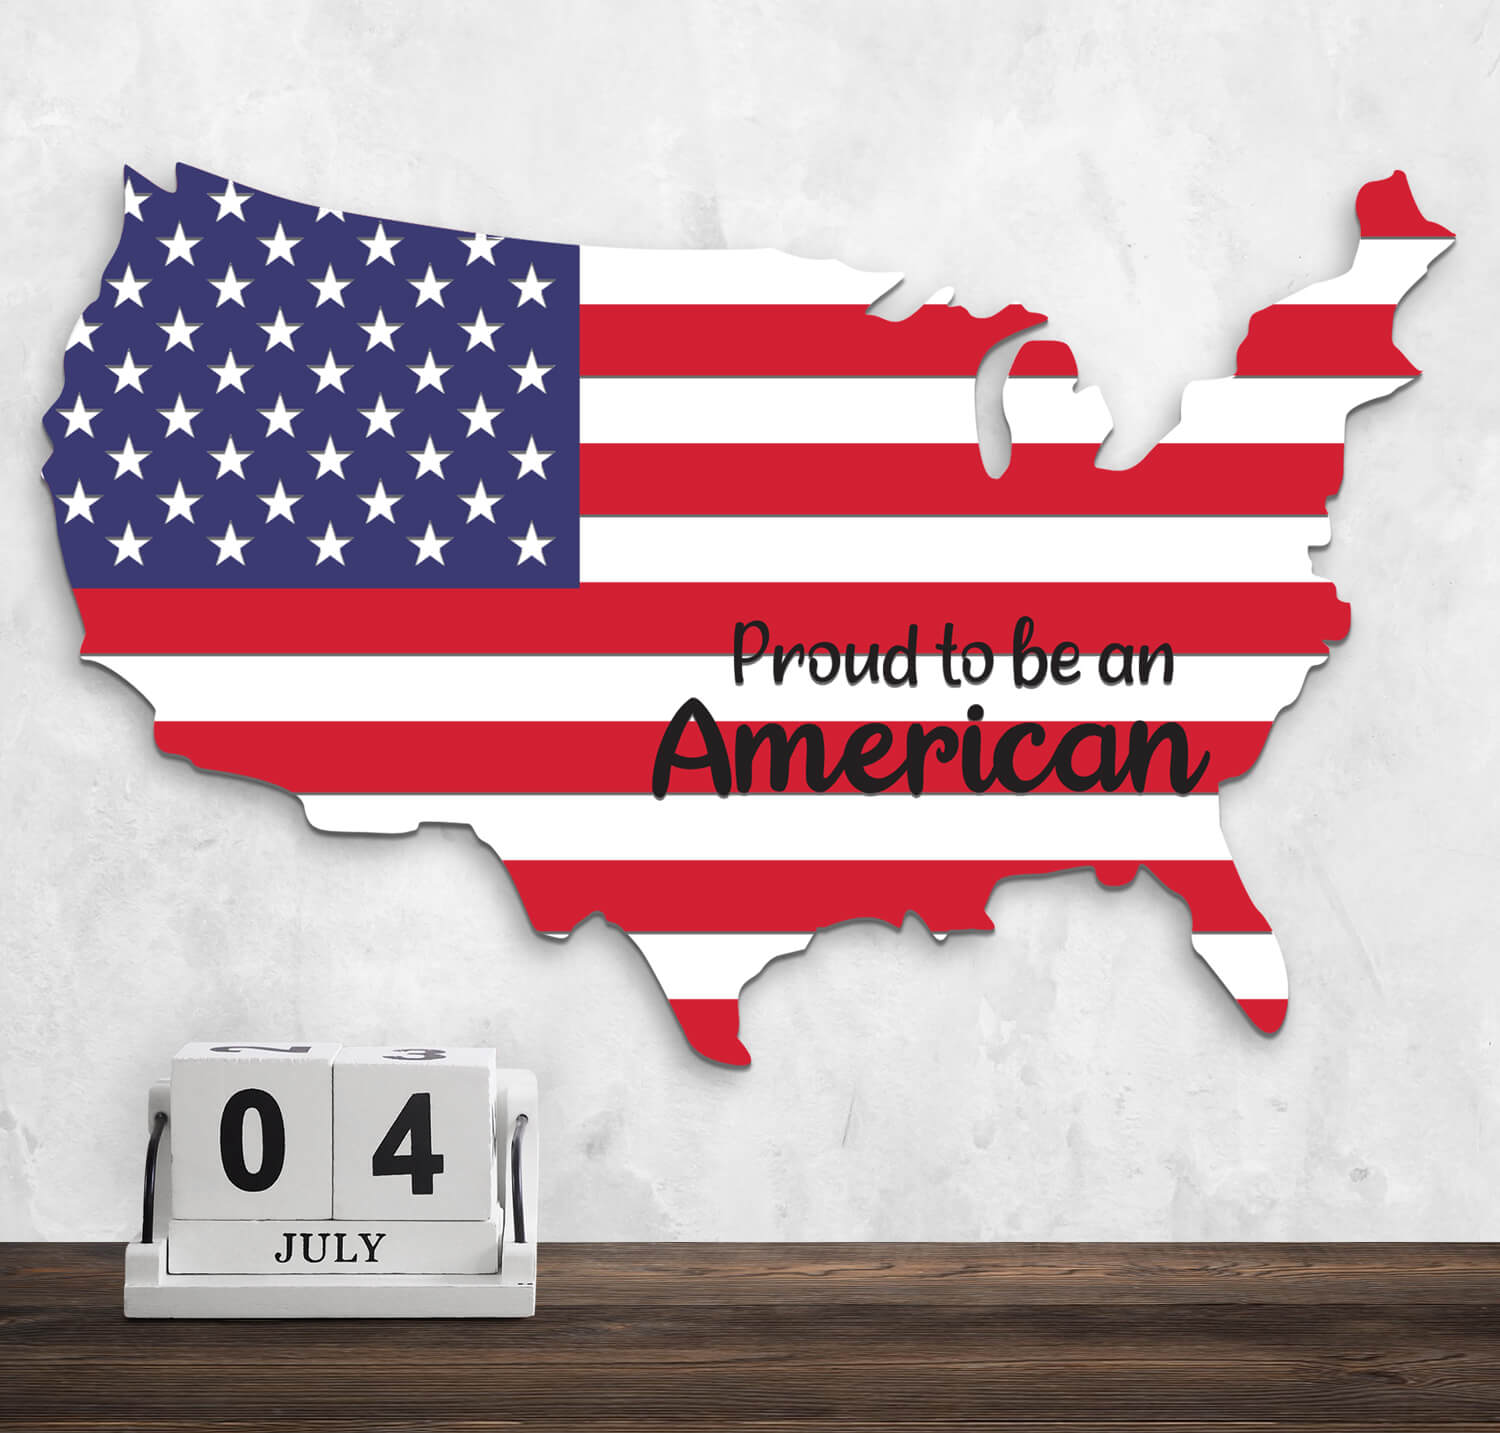 United States shaped wall decor customzied with 'proud to be an American' and decorated like the US flag